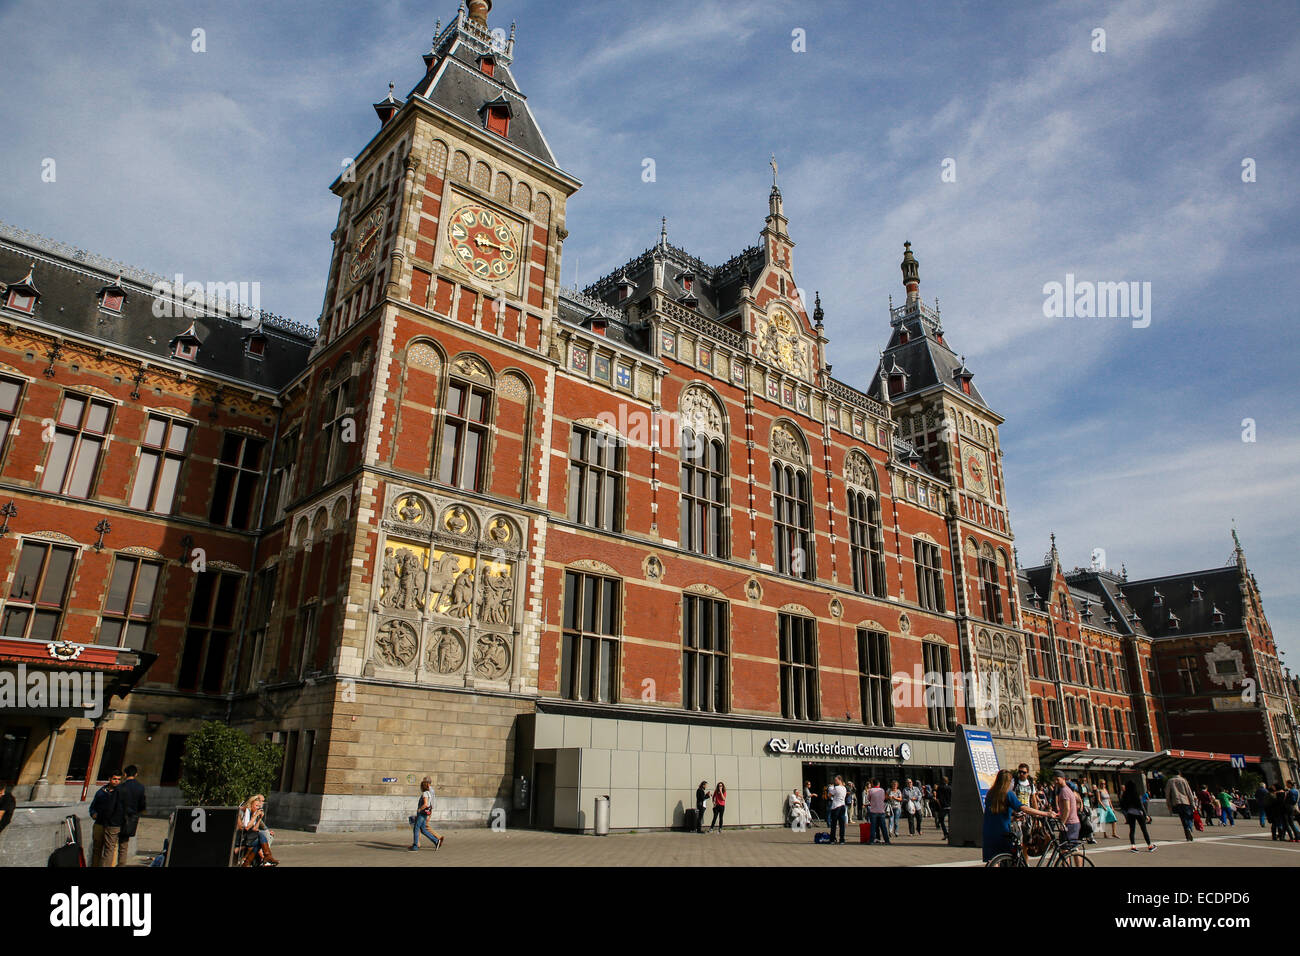 amsterdam central train station building exterior Stock Photo